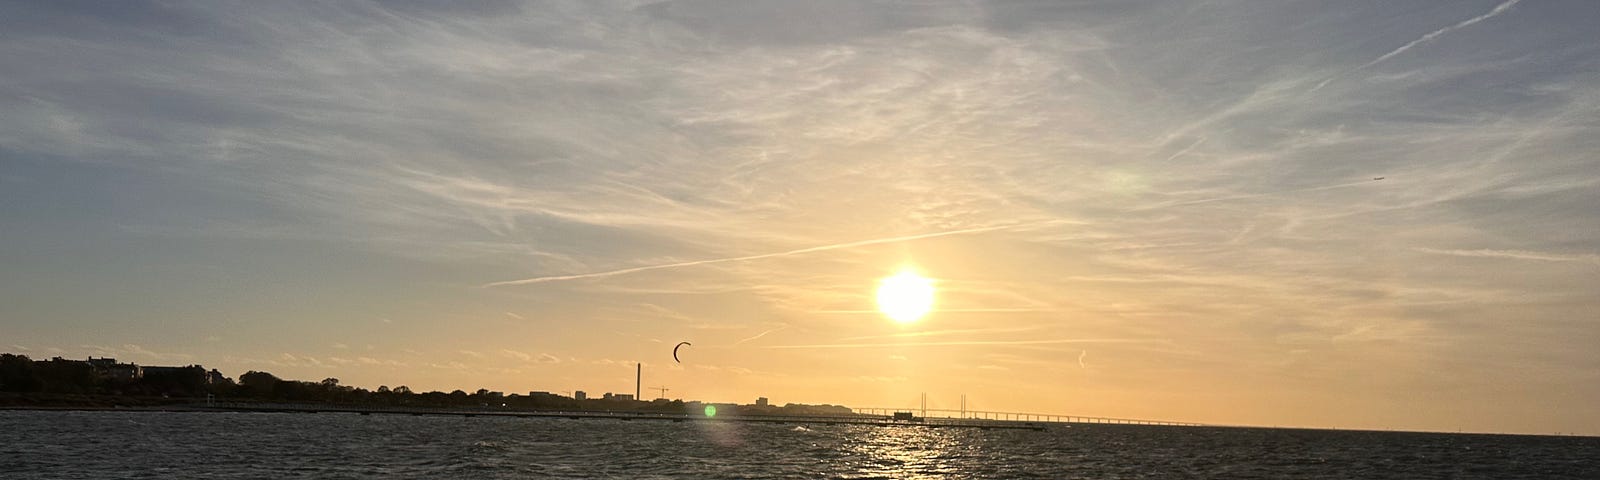 Hazy sky with the sun over Oresund bridge in Malmö, Sweden. Open water and waves. A person is windsurfing.